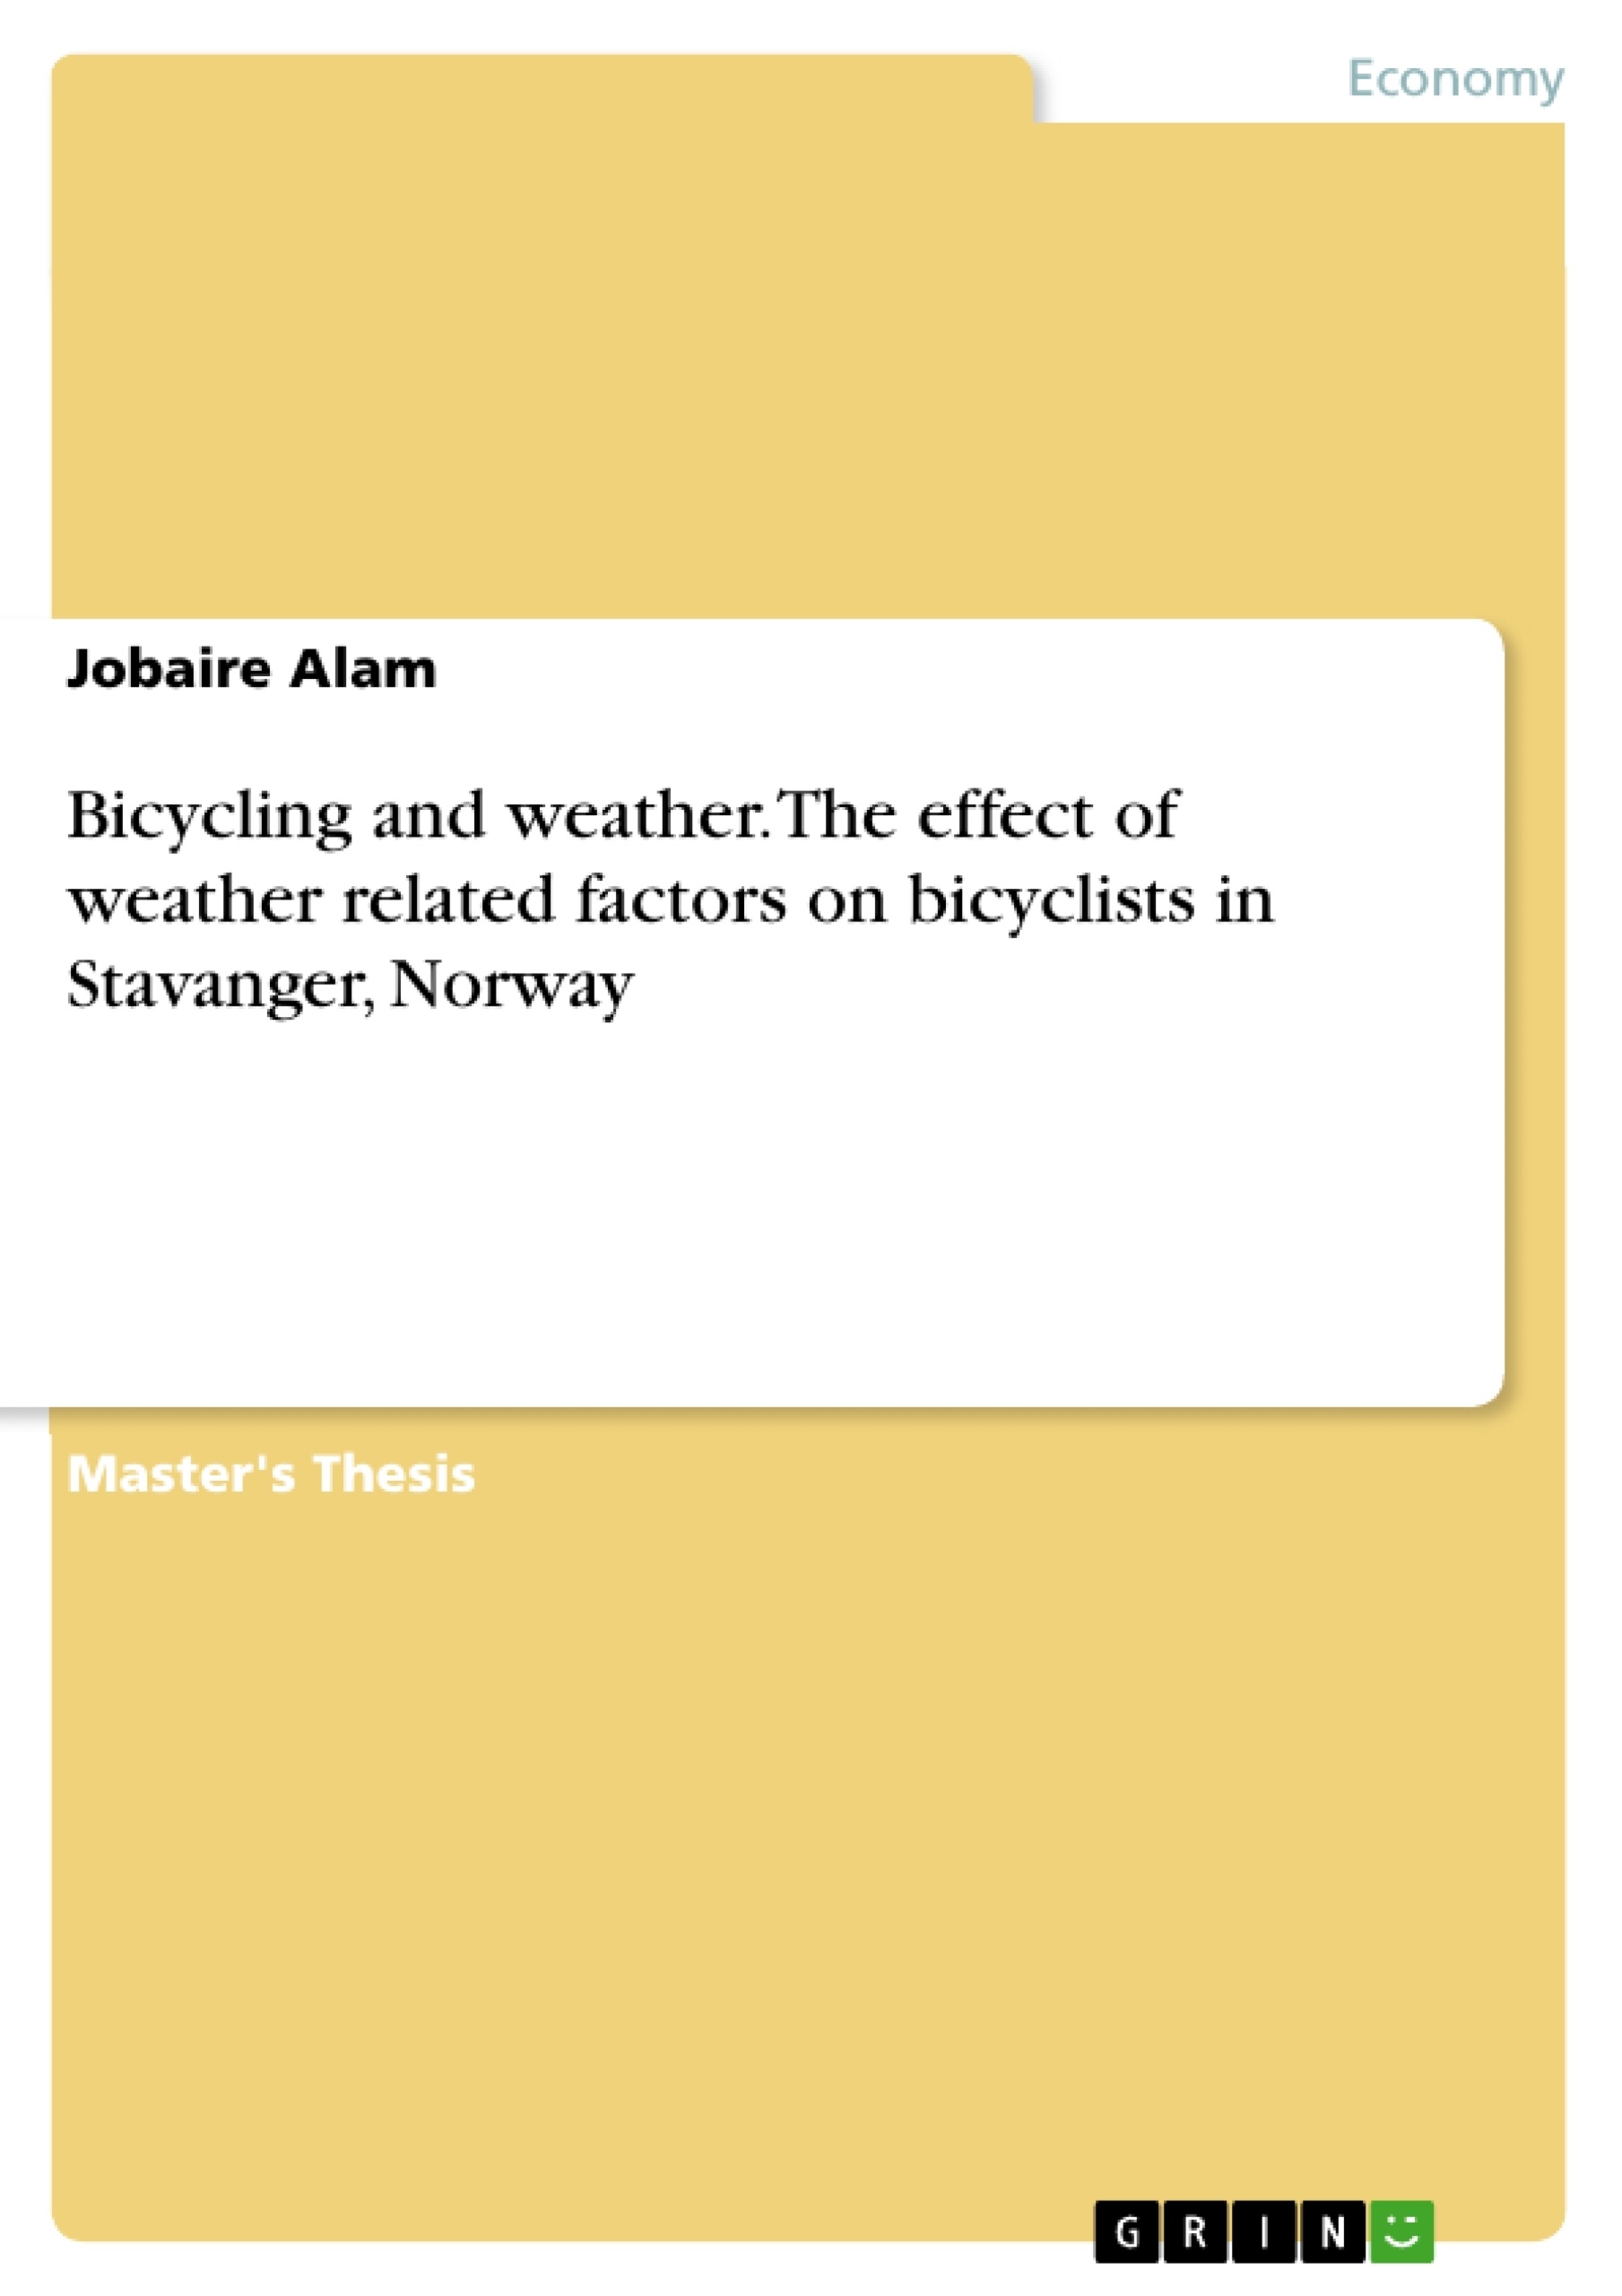 Title: Bicycling and weather. The effect of weather related factors on bicyclists in Stavanger, Norway